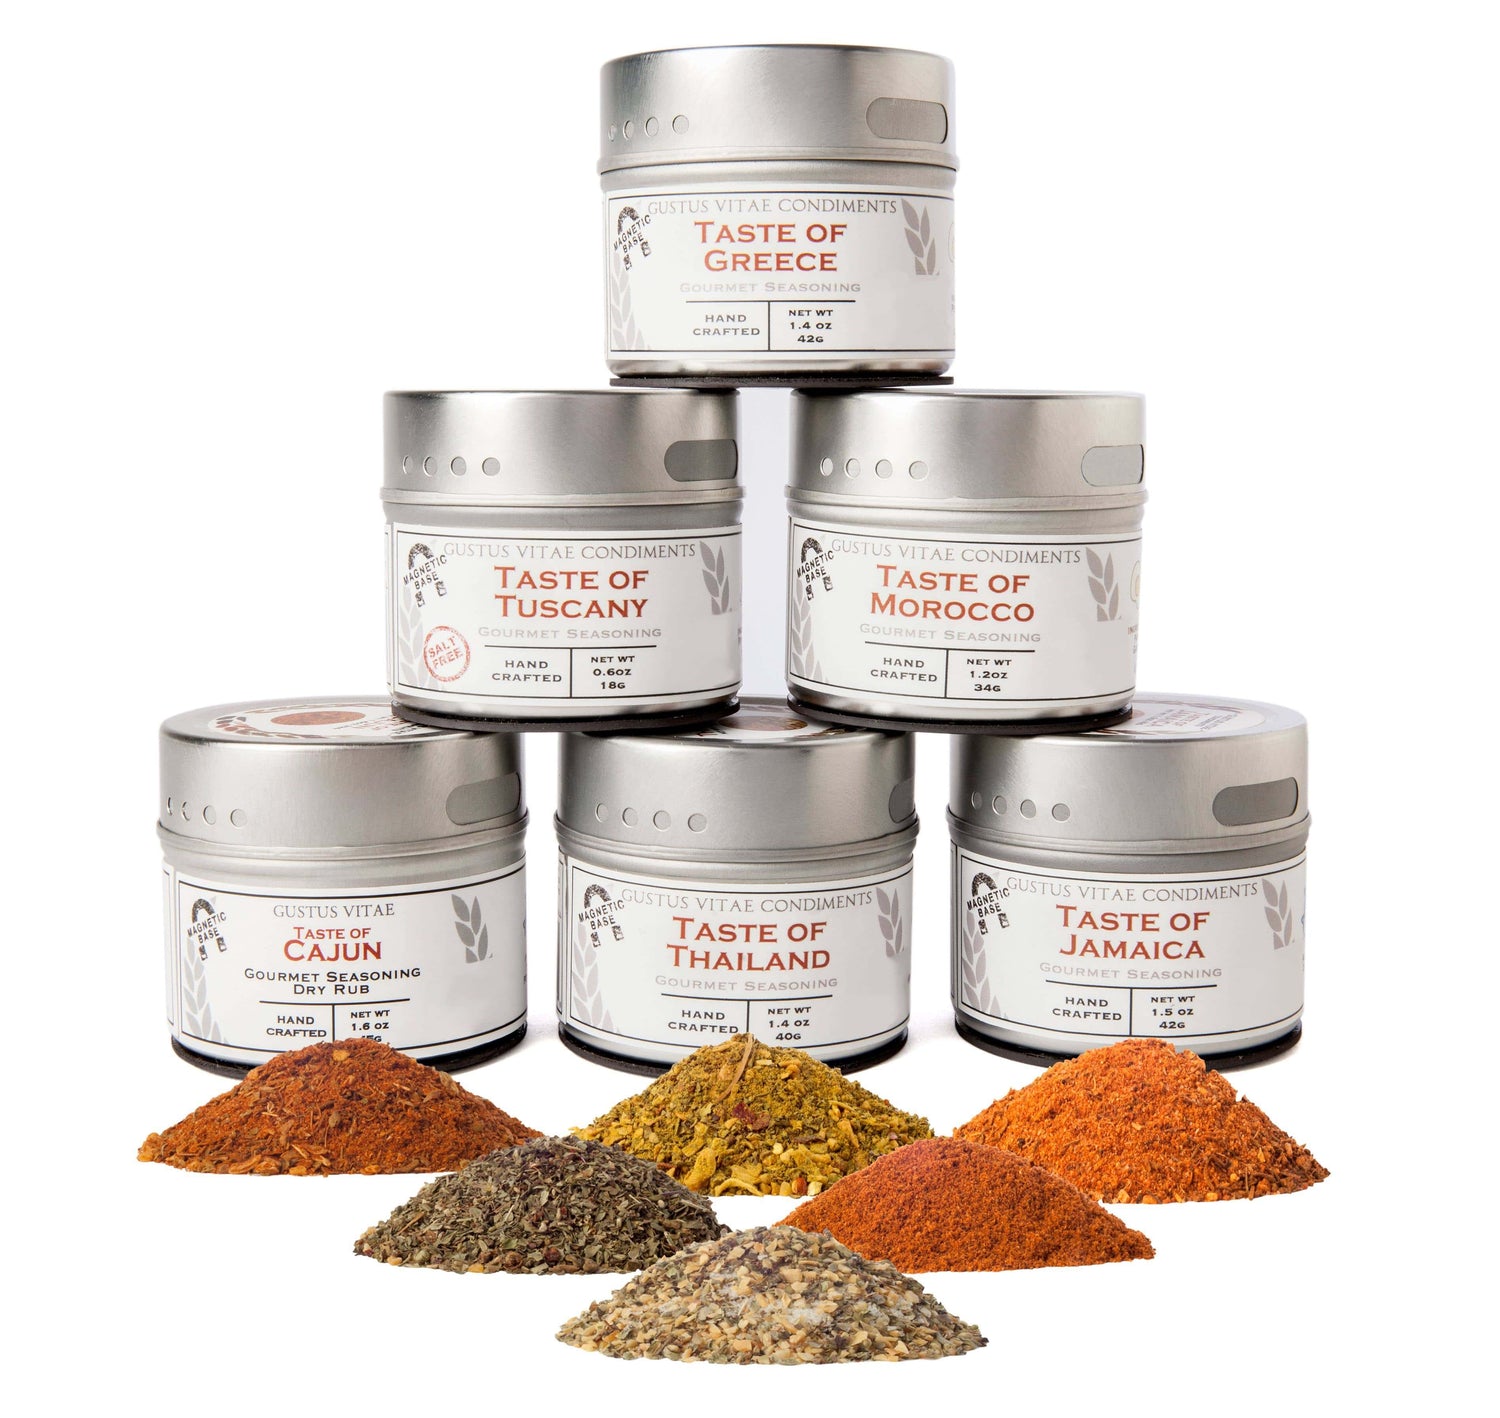 Cuisines of the World Gourmet Seasonings Collection - 6 Tins by Gustus Vitae